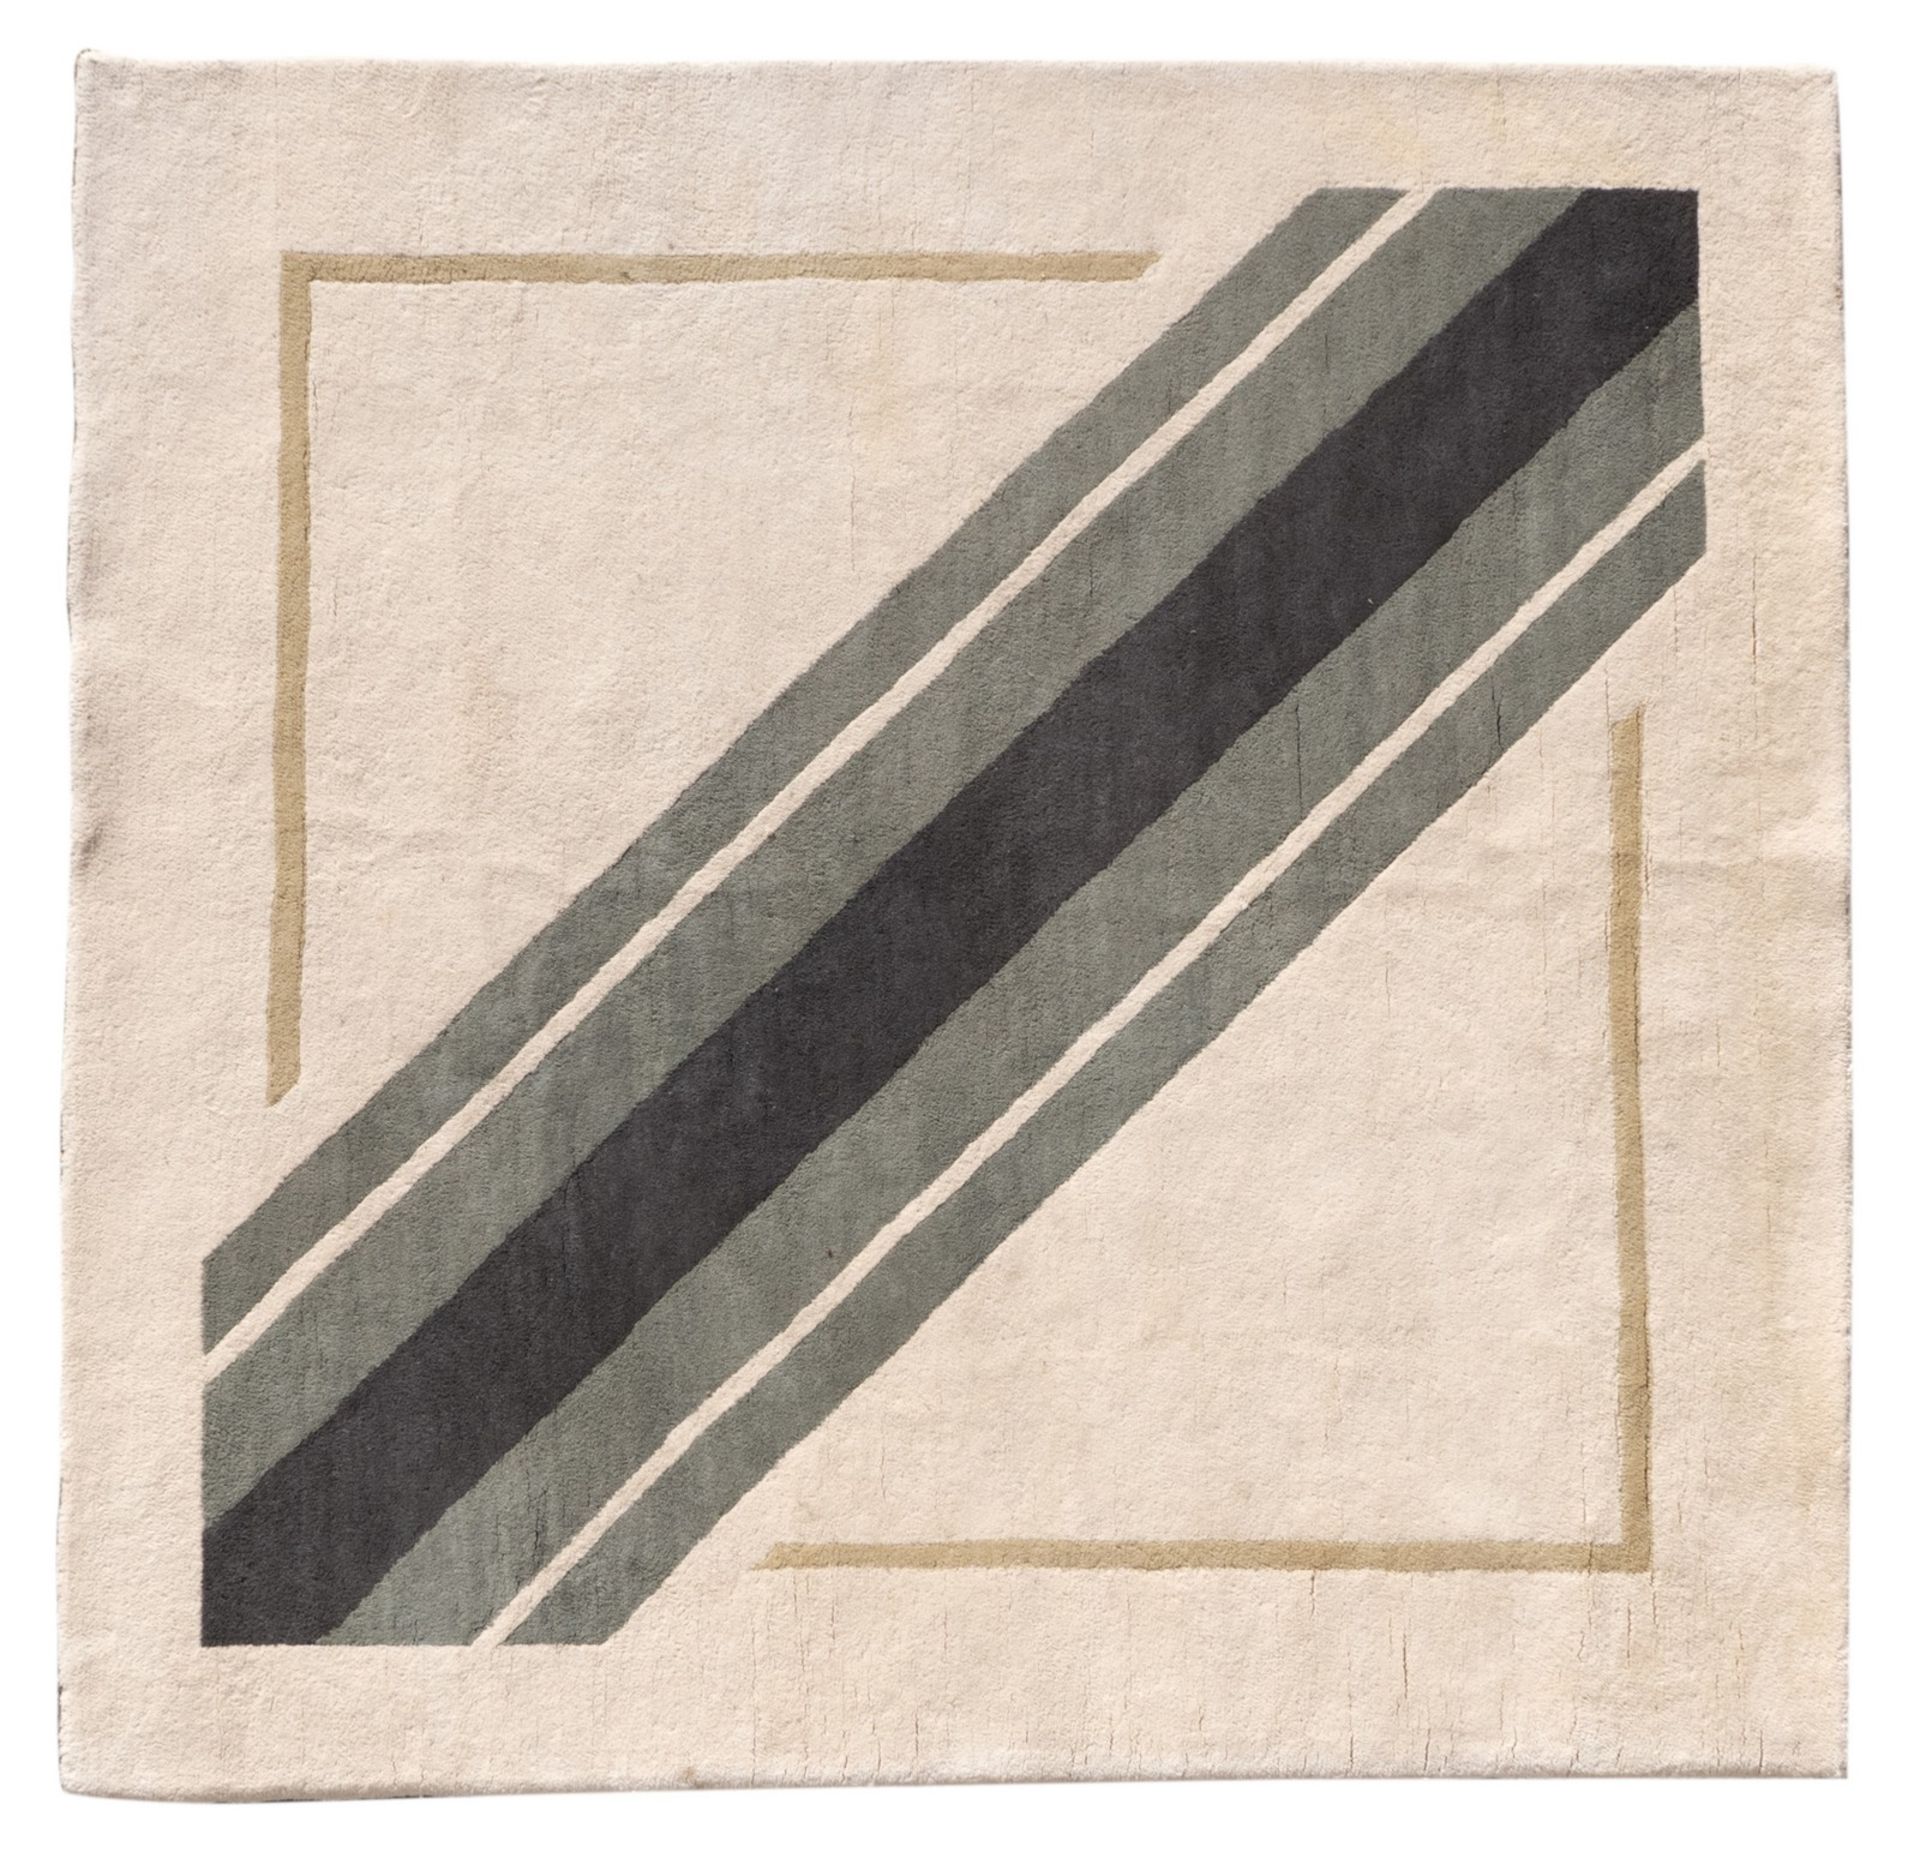 Decock G., Avanos, wool on cotton, dated 1987 (with certificate), circa 2 x 2 m